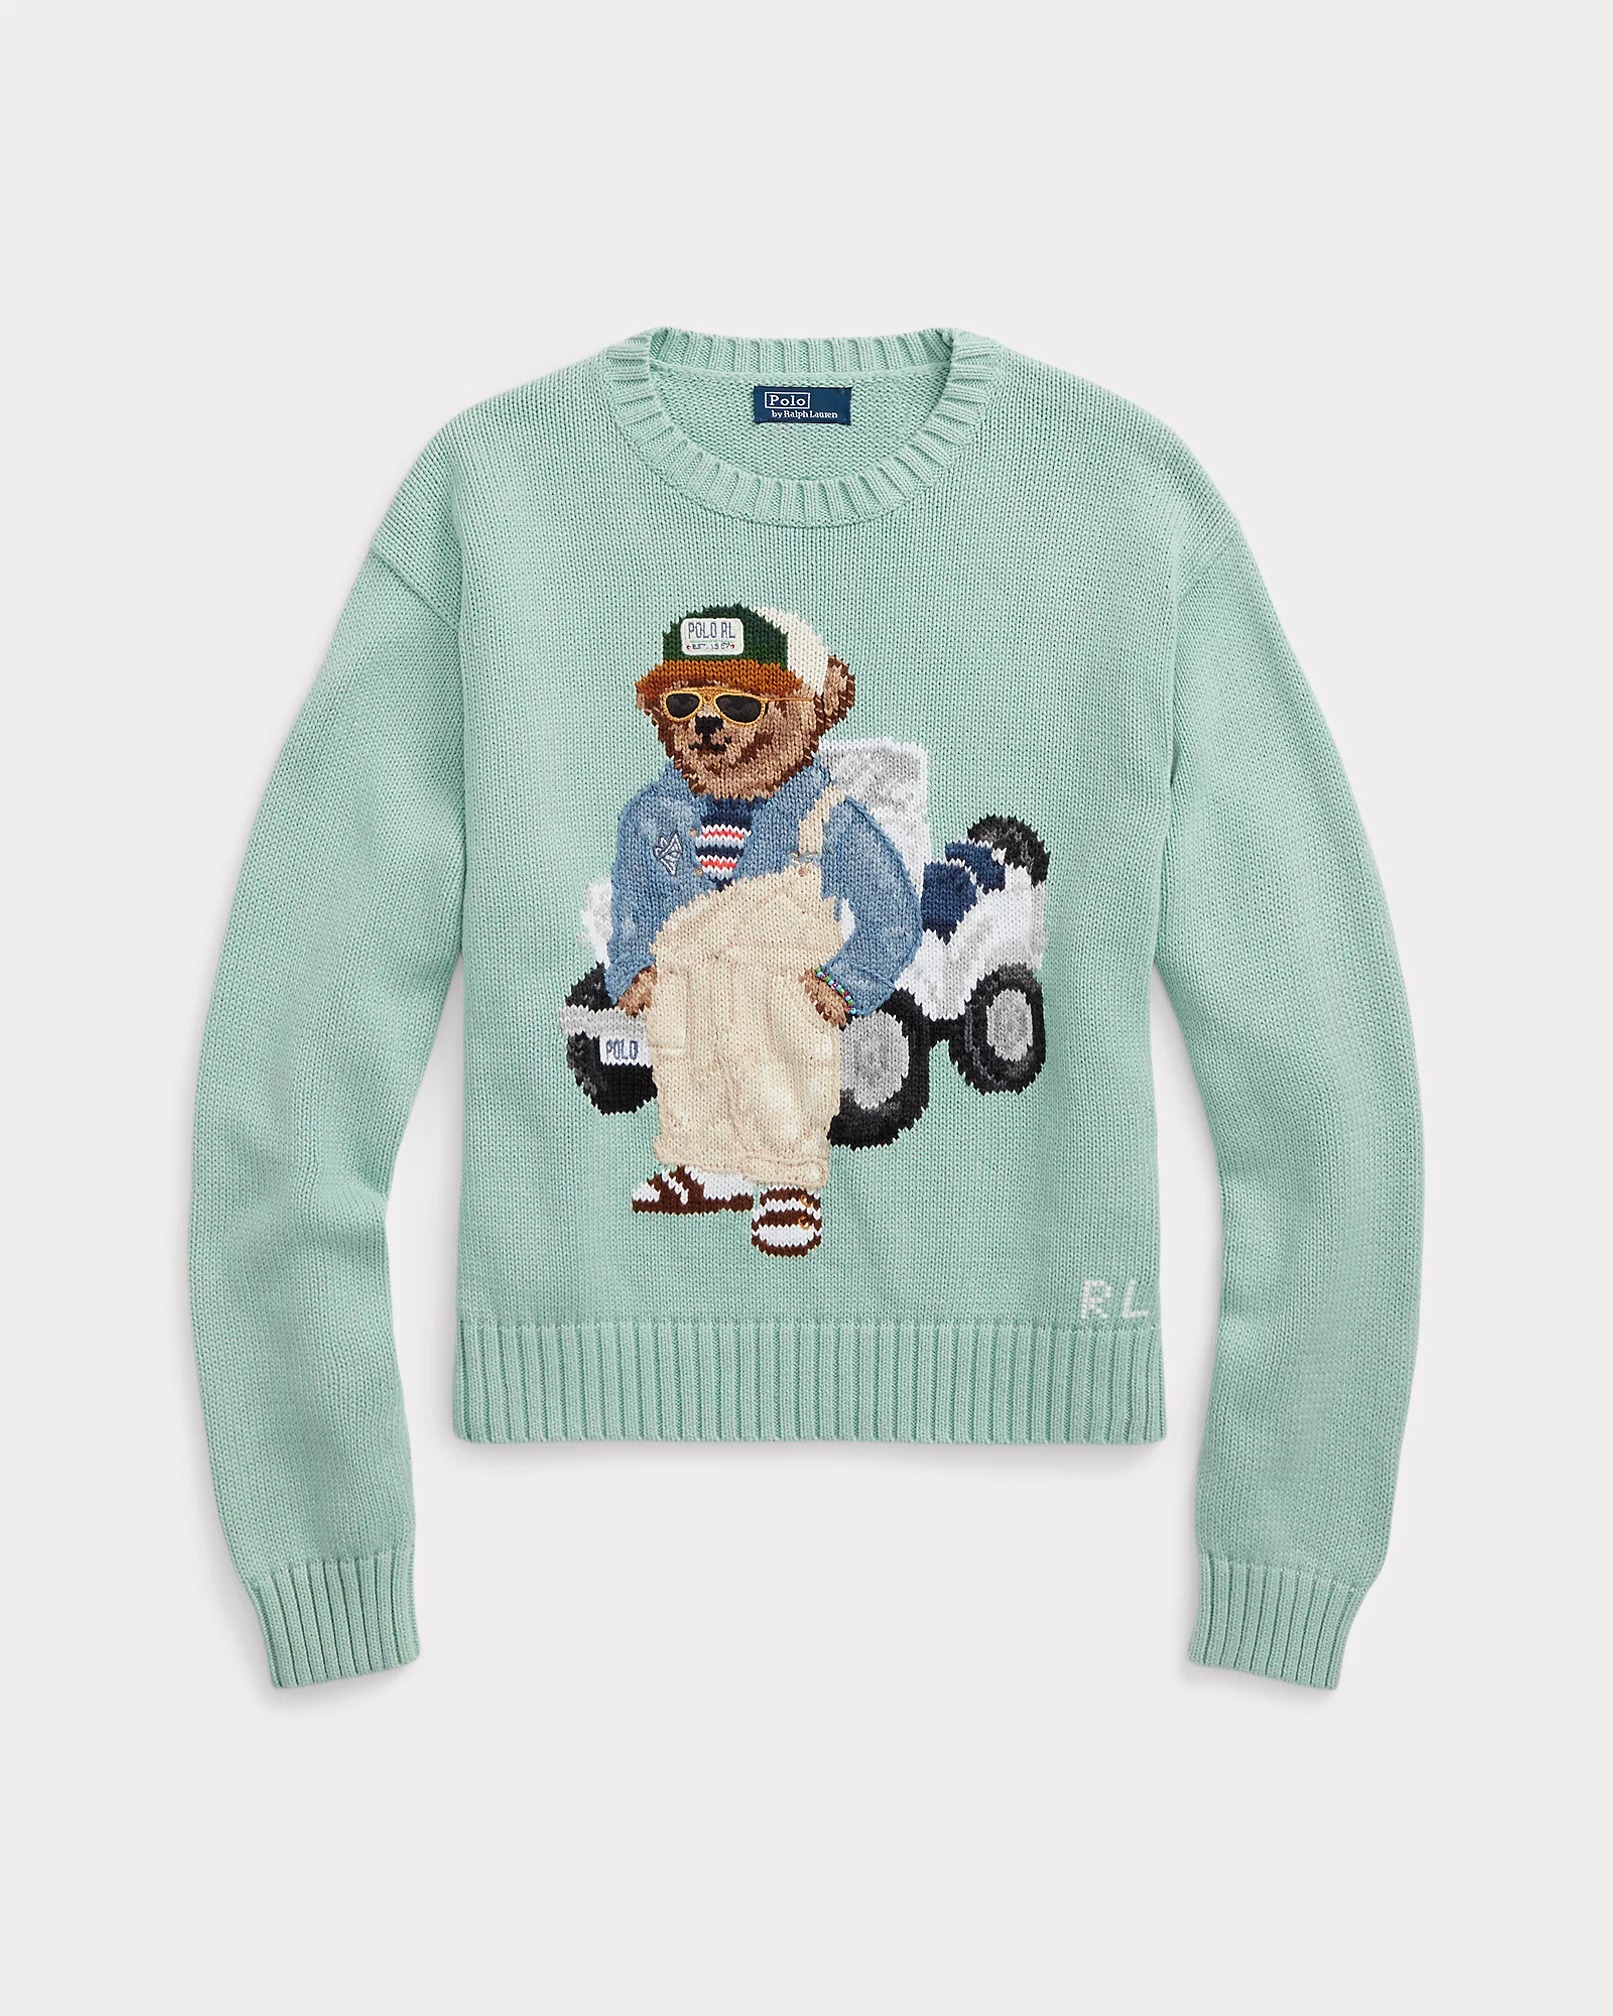 mint green Ralph Lauren sweater with polo bear on it